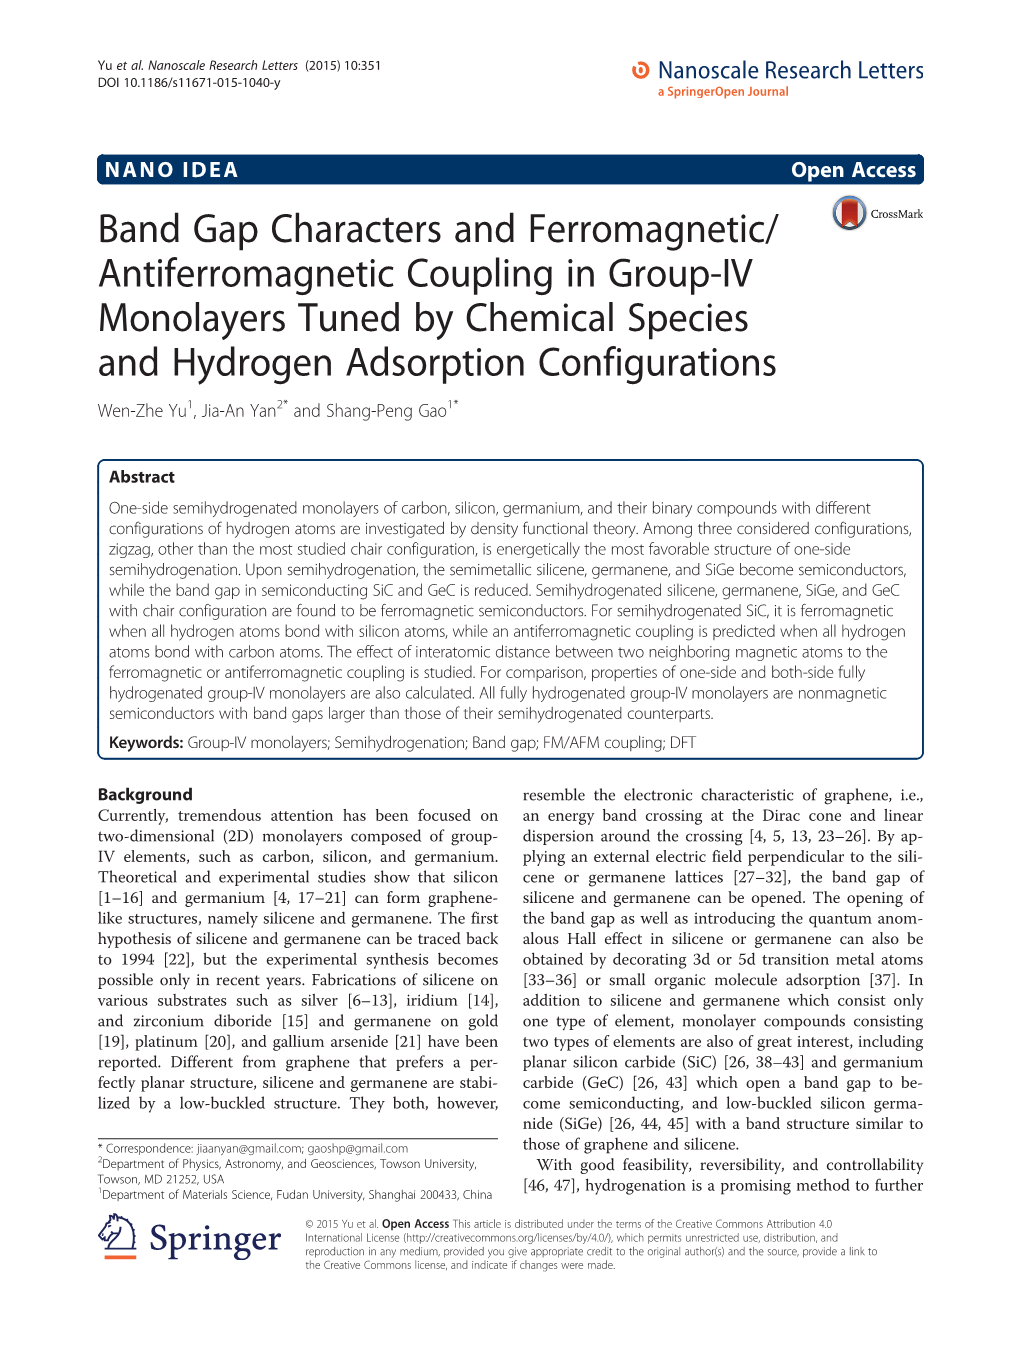 Band Gap Characters and Ferromagnetic/Antiferromagnetic Coupling in Group-IV Monolayers Tuned by Chemical Species and Hydrogen A